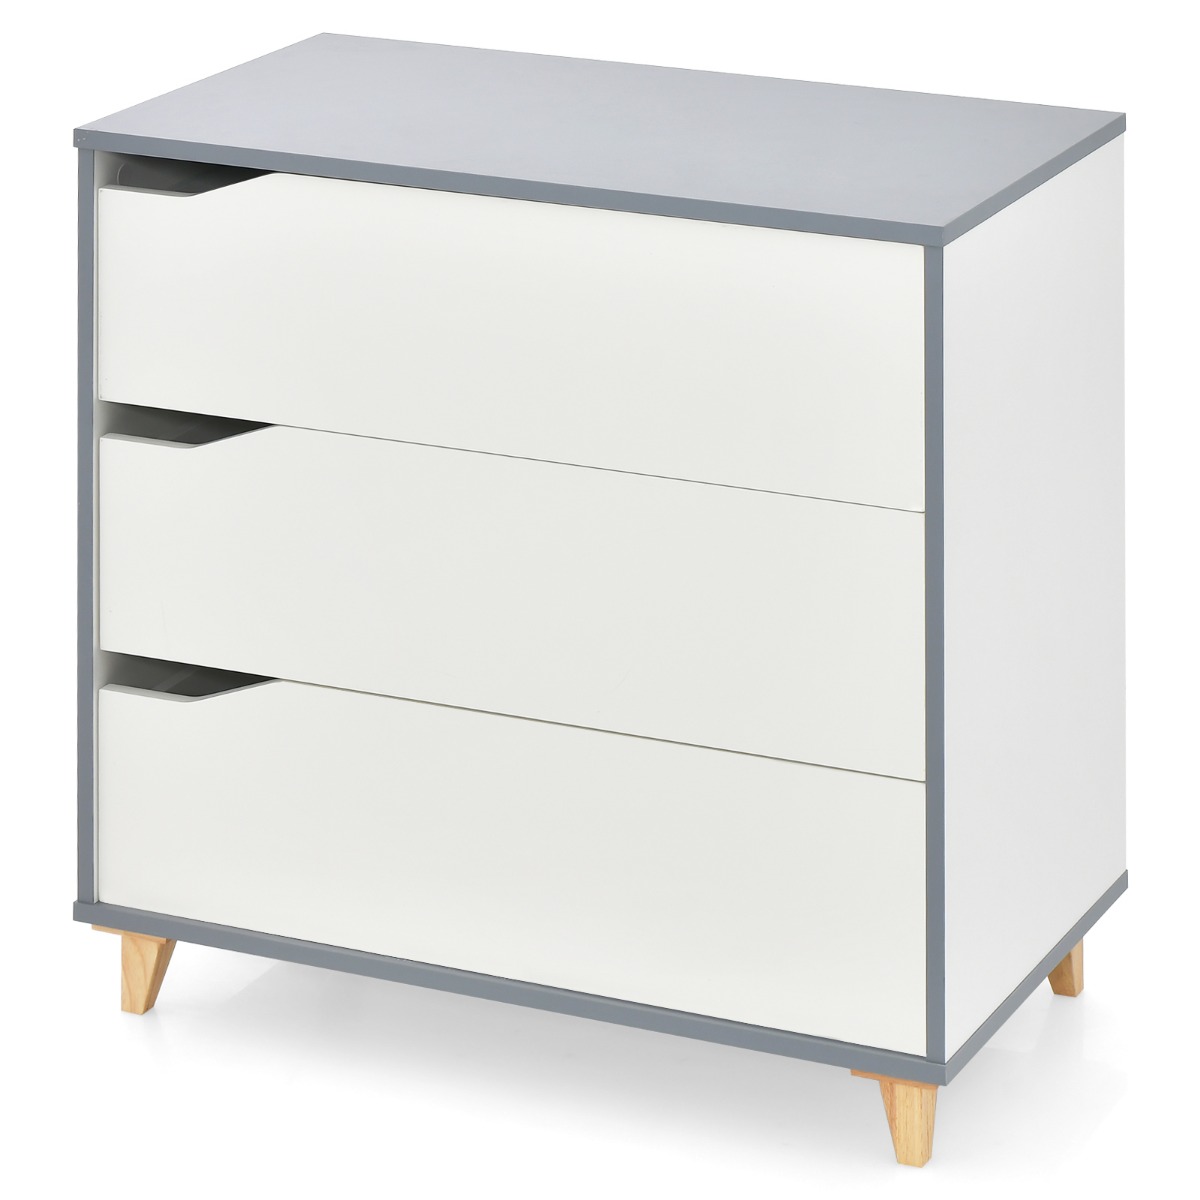 Modern 3 Drawer Chest Dresser with Large Storage Capacity Embedded Handle-White